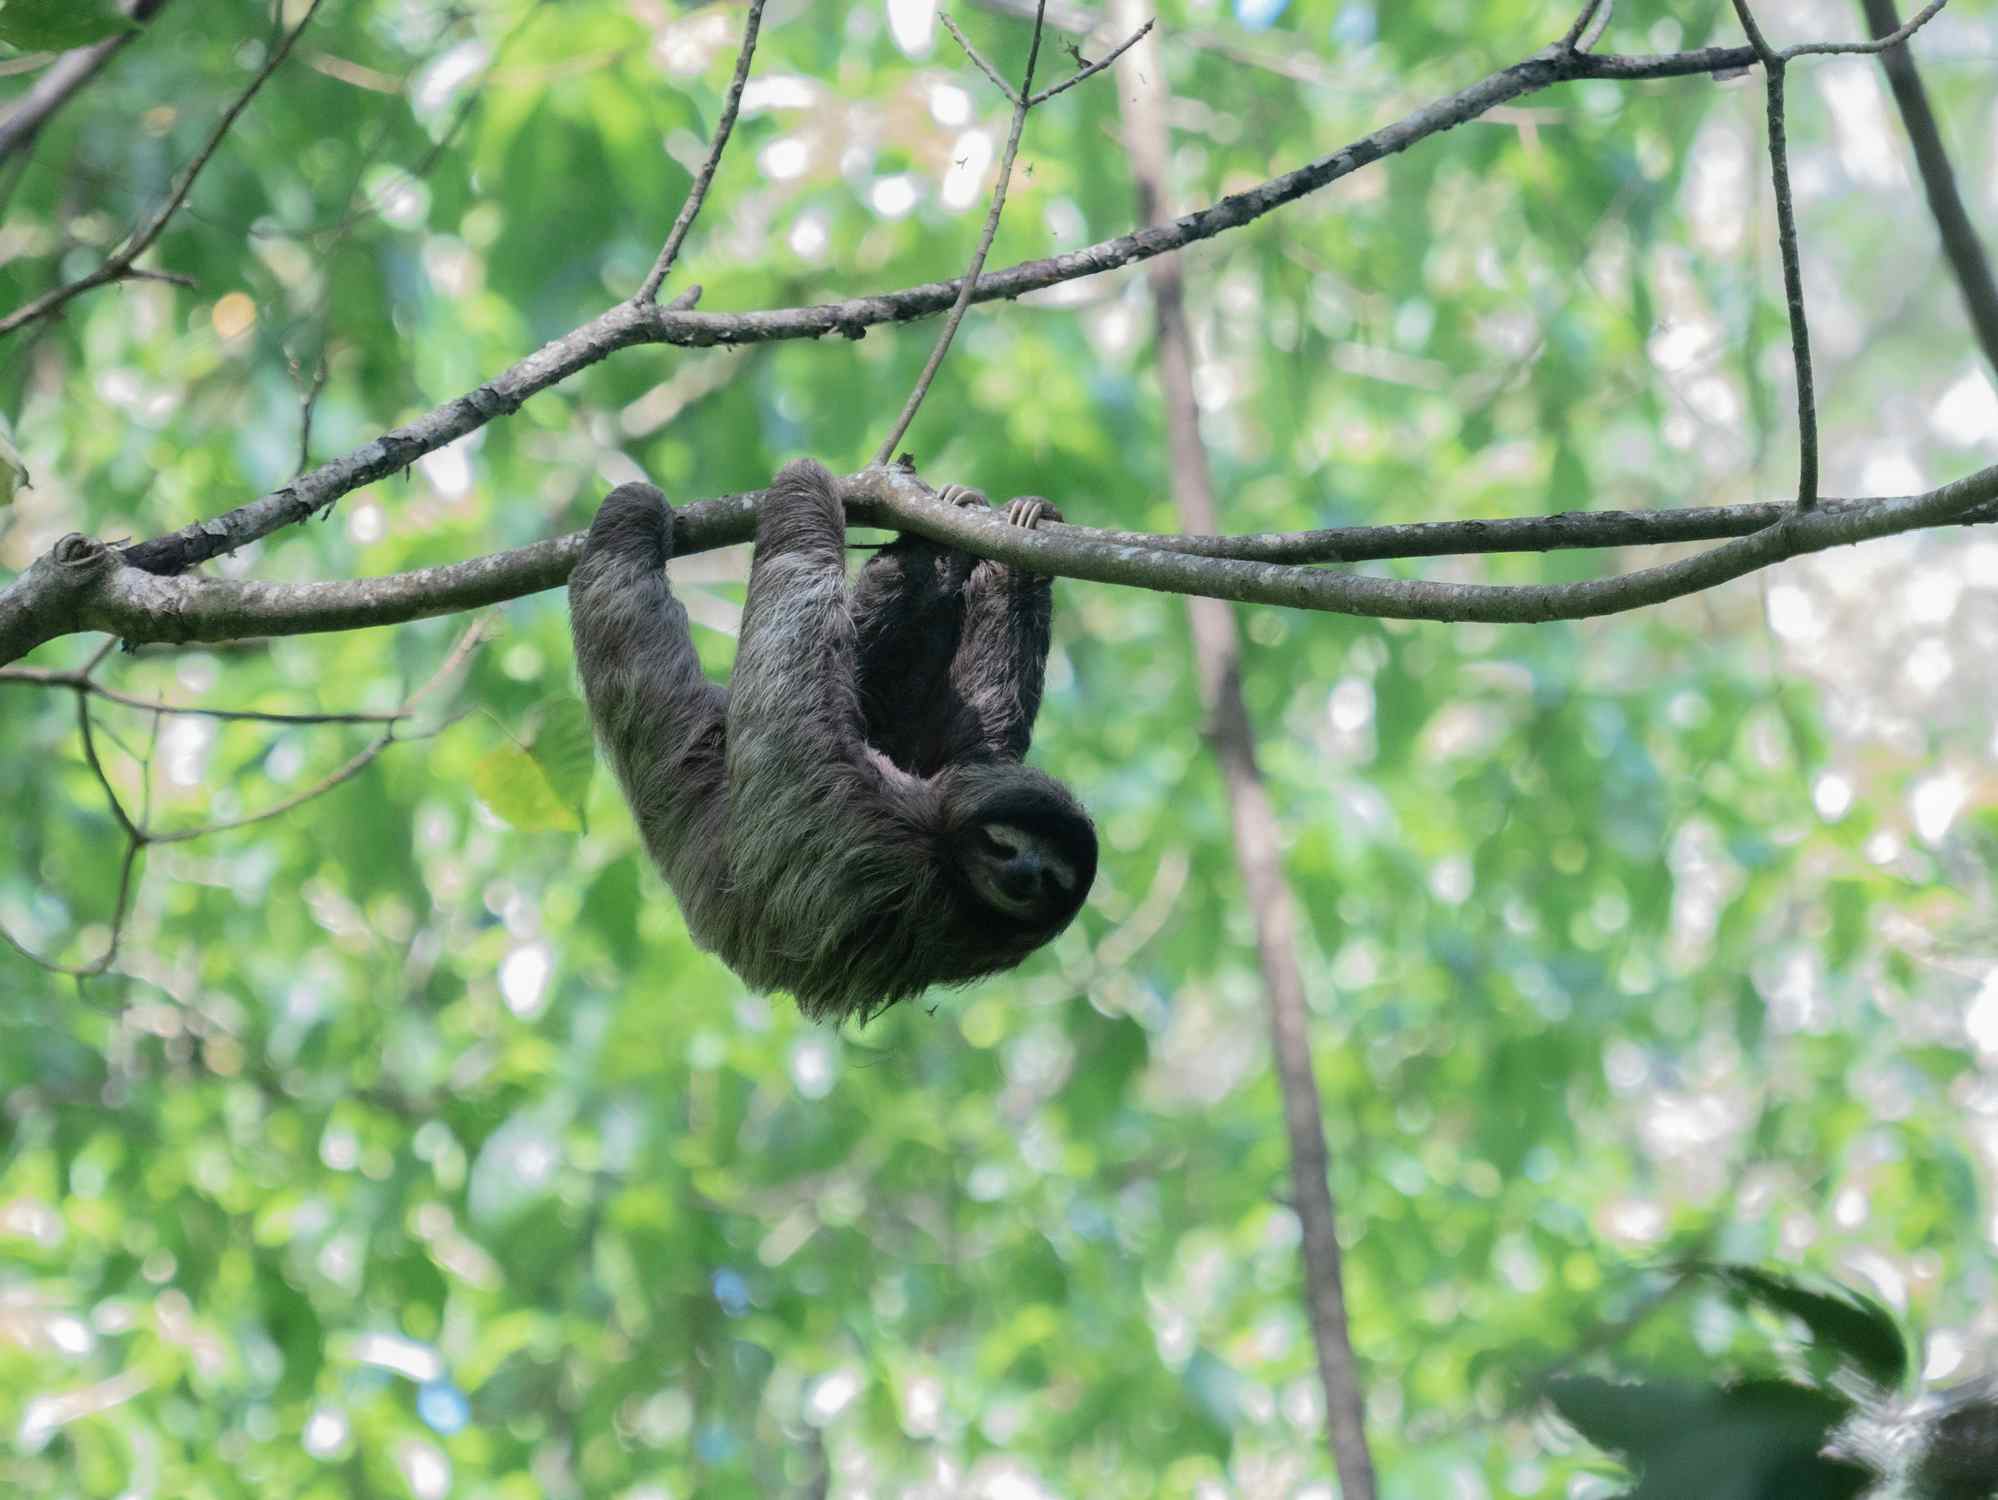 Sloth hanging from a branch in Costa Rica.